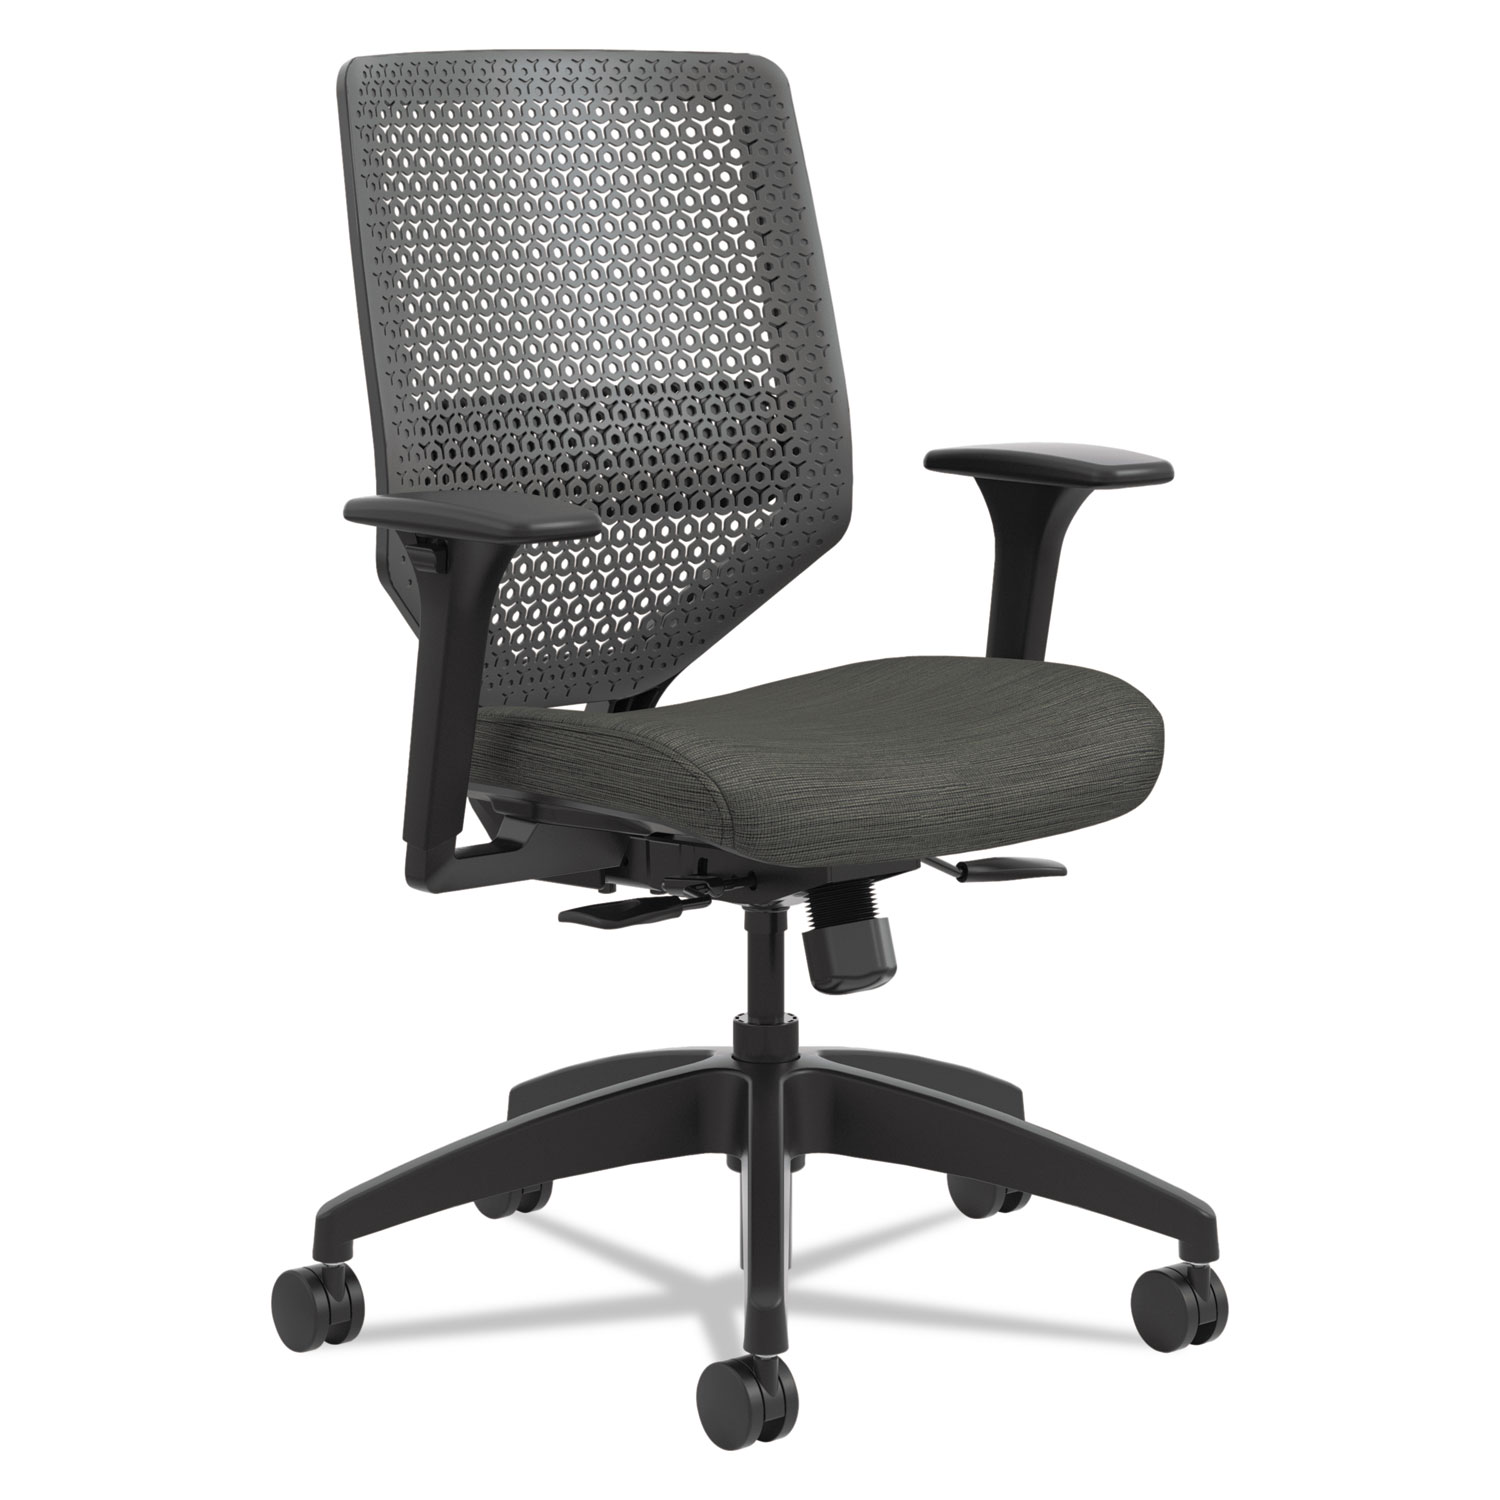  HON SVR1ACLC10TK Solve Series ReActiv Back Task Chair, Supports up to 300 lbs., Ink Seat/Charcoal Back, Black Base (HONSVR1ACLC10TK) 